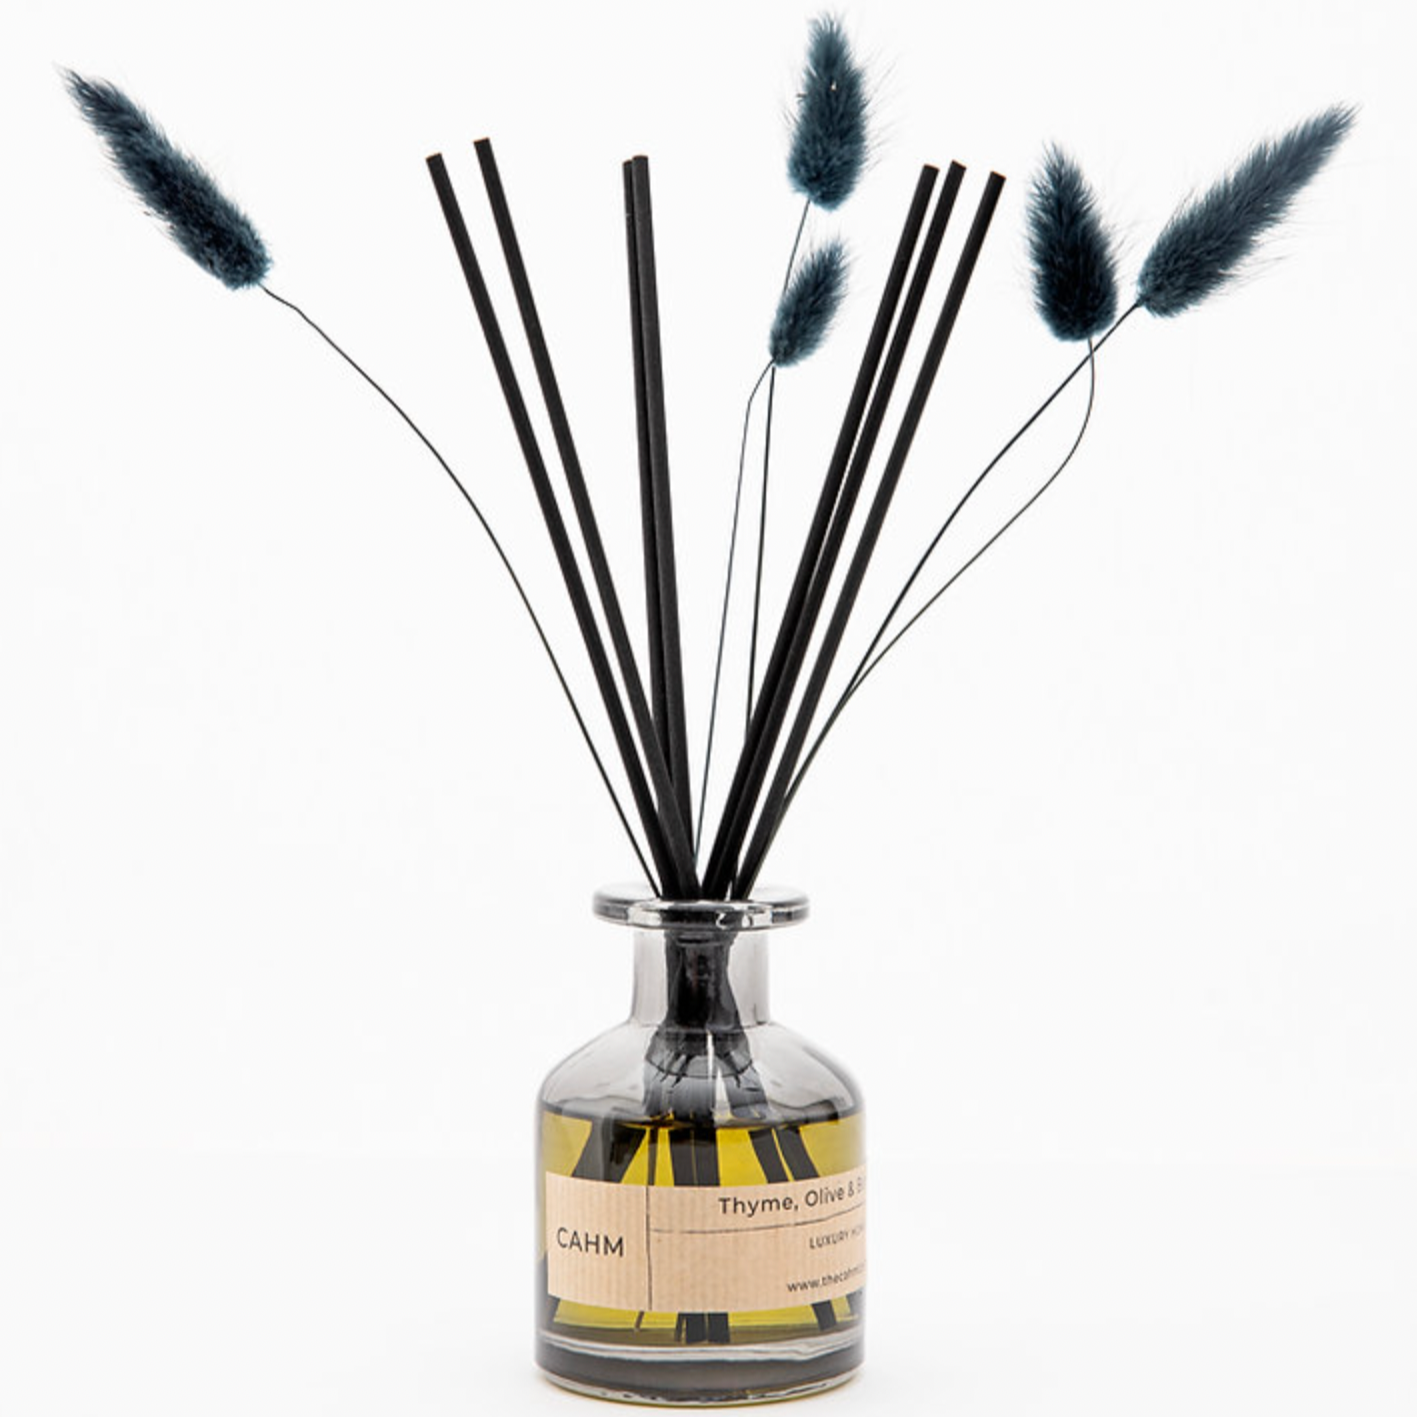 A Thyme, Olive and Bergamot reed diffuser from The CAHM Collective.